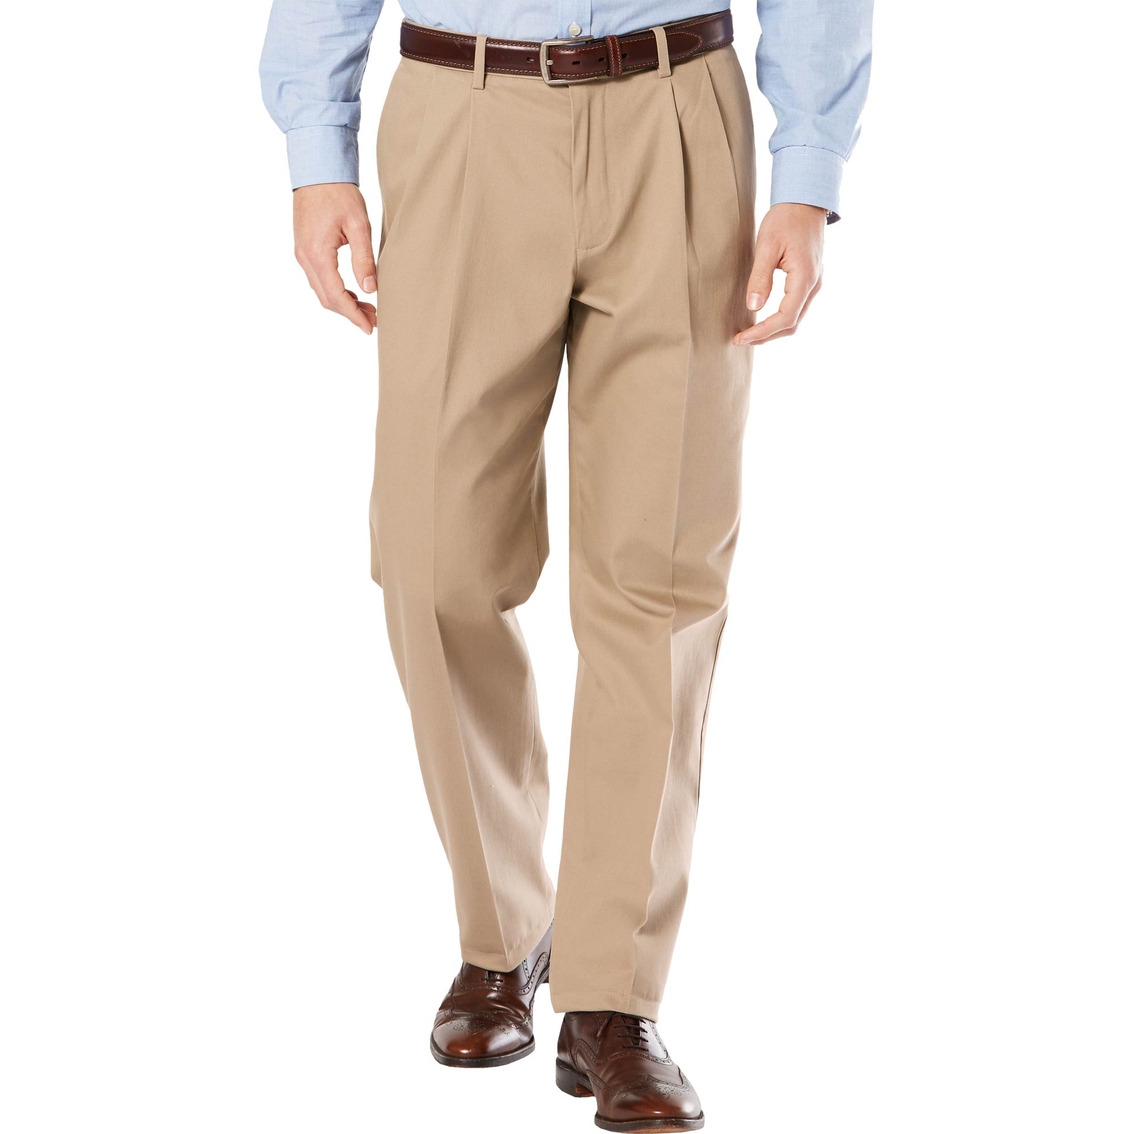 Dockers Signature Stretch Khaki Relaxed Fit Pleated Pants | Pants ...